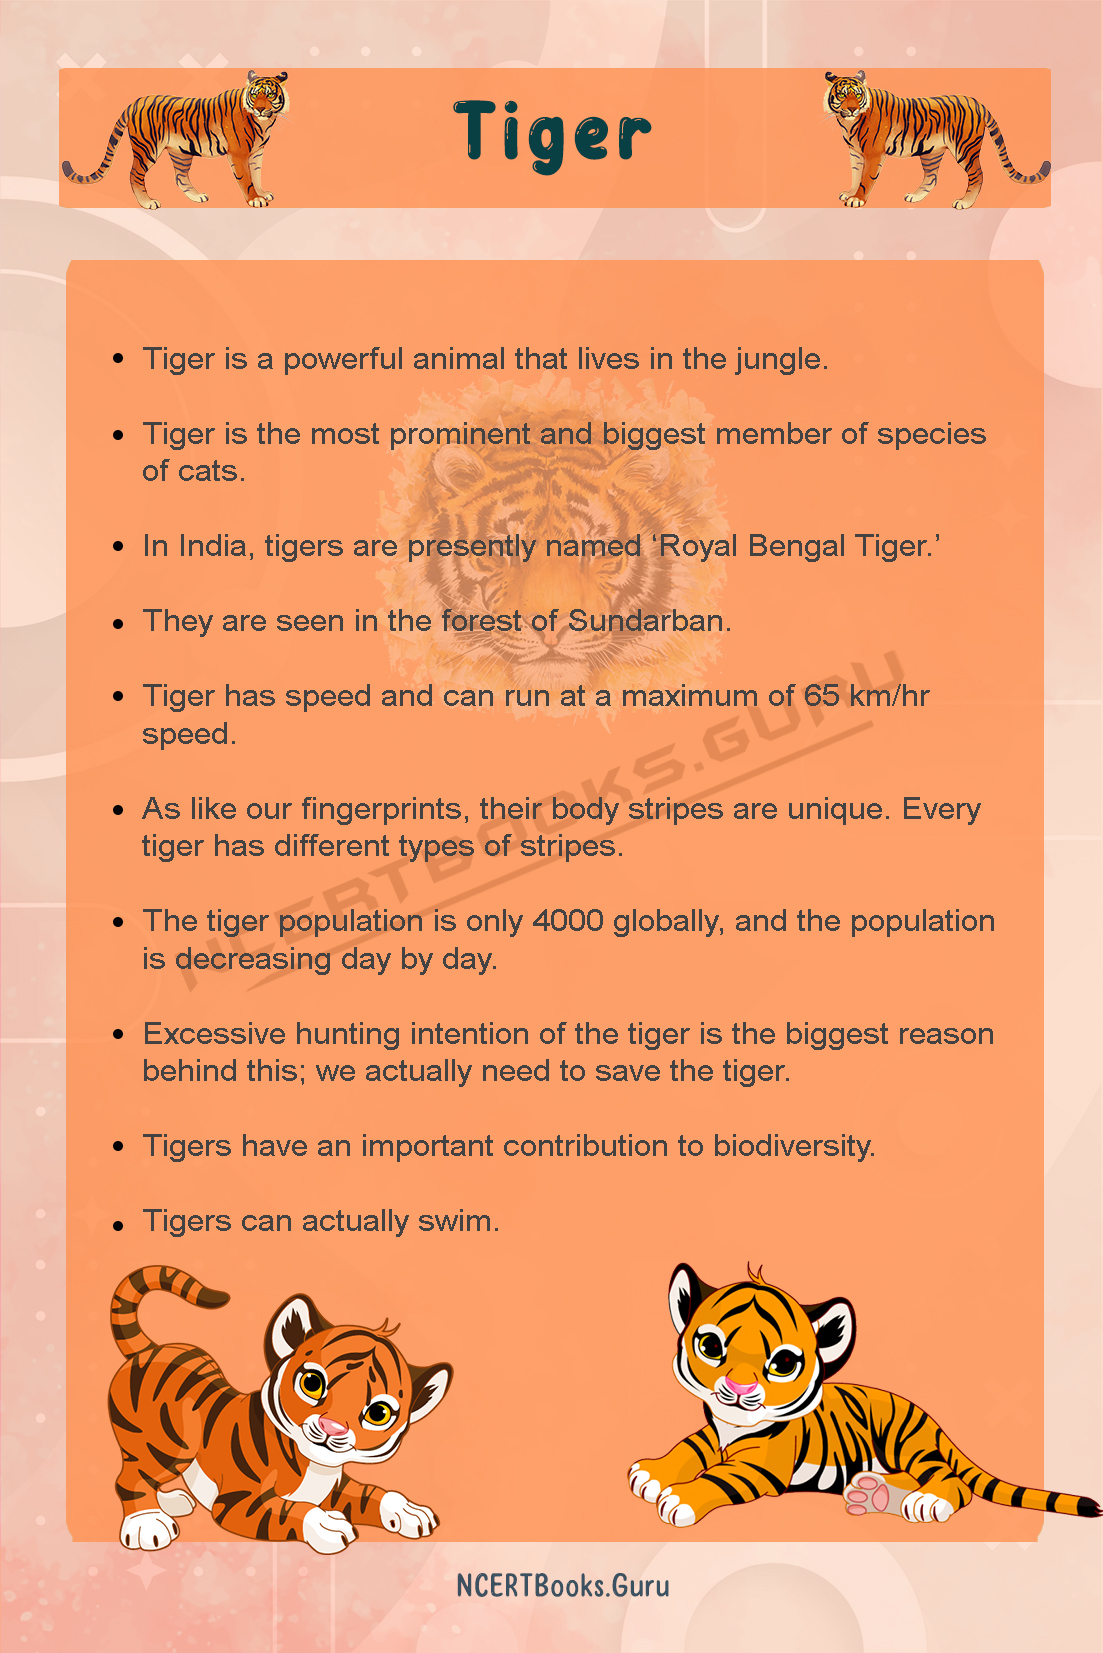 tiger essay in english 10 lines for class 7